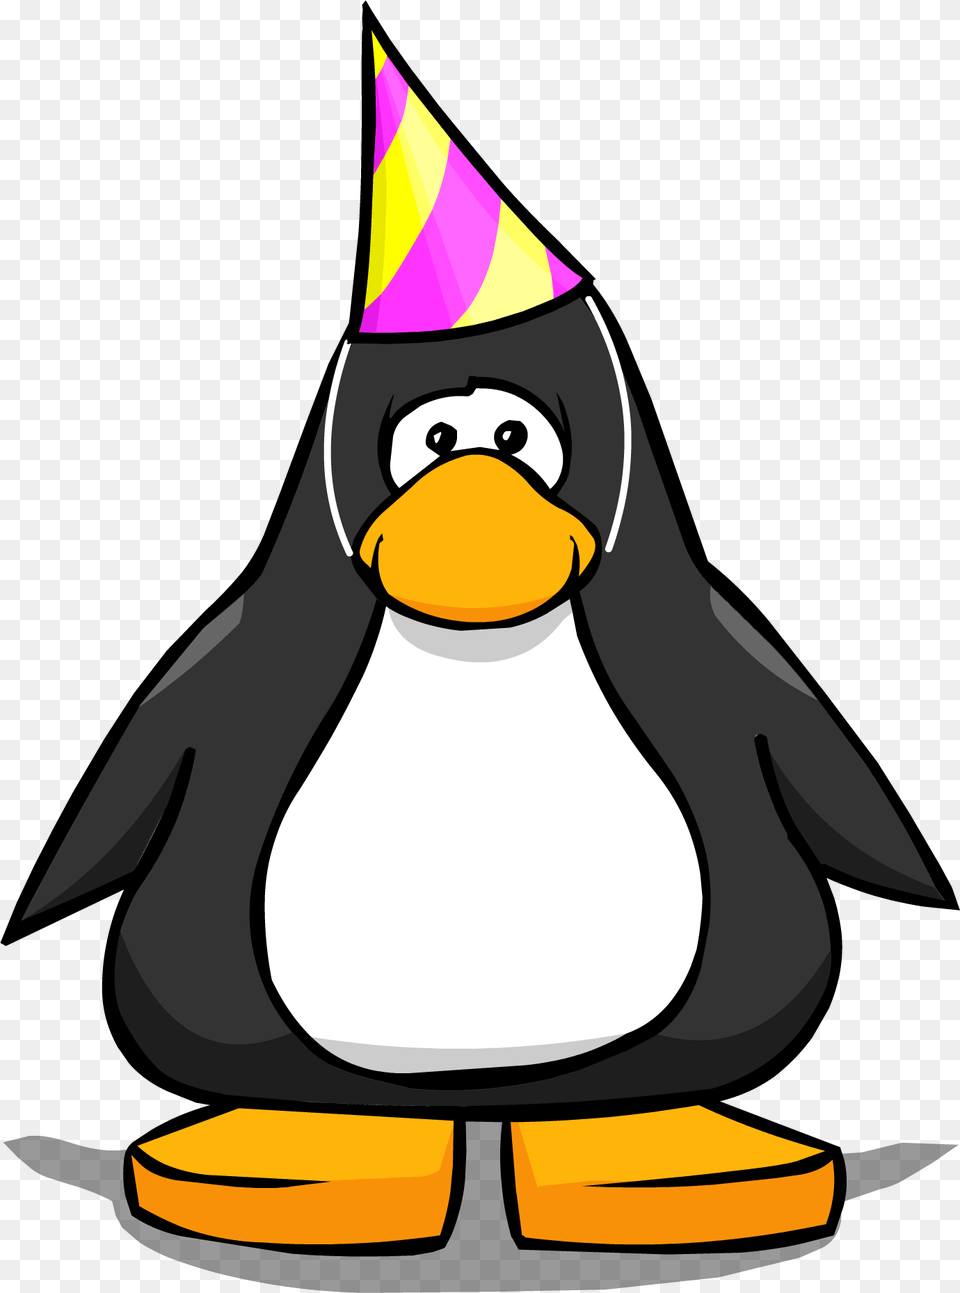 Club Penguin Wiki Penguin With Santa Hat, Clothing, Animal, Bird, Party Hat Png Image